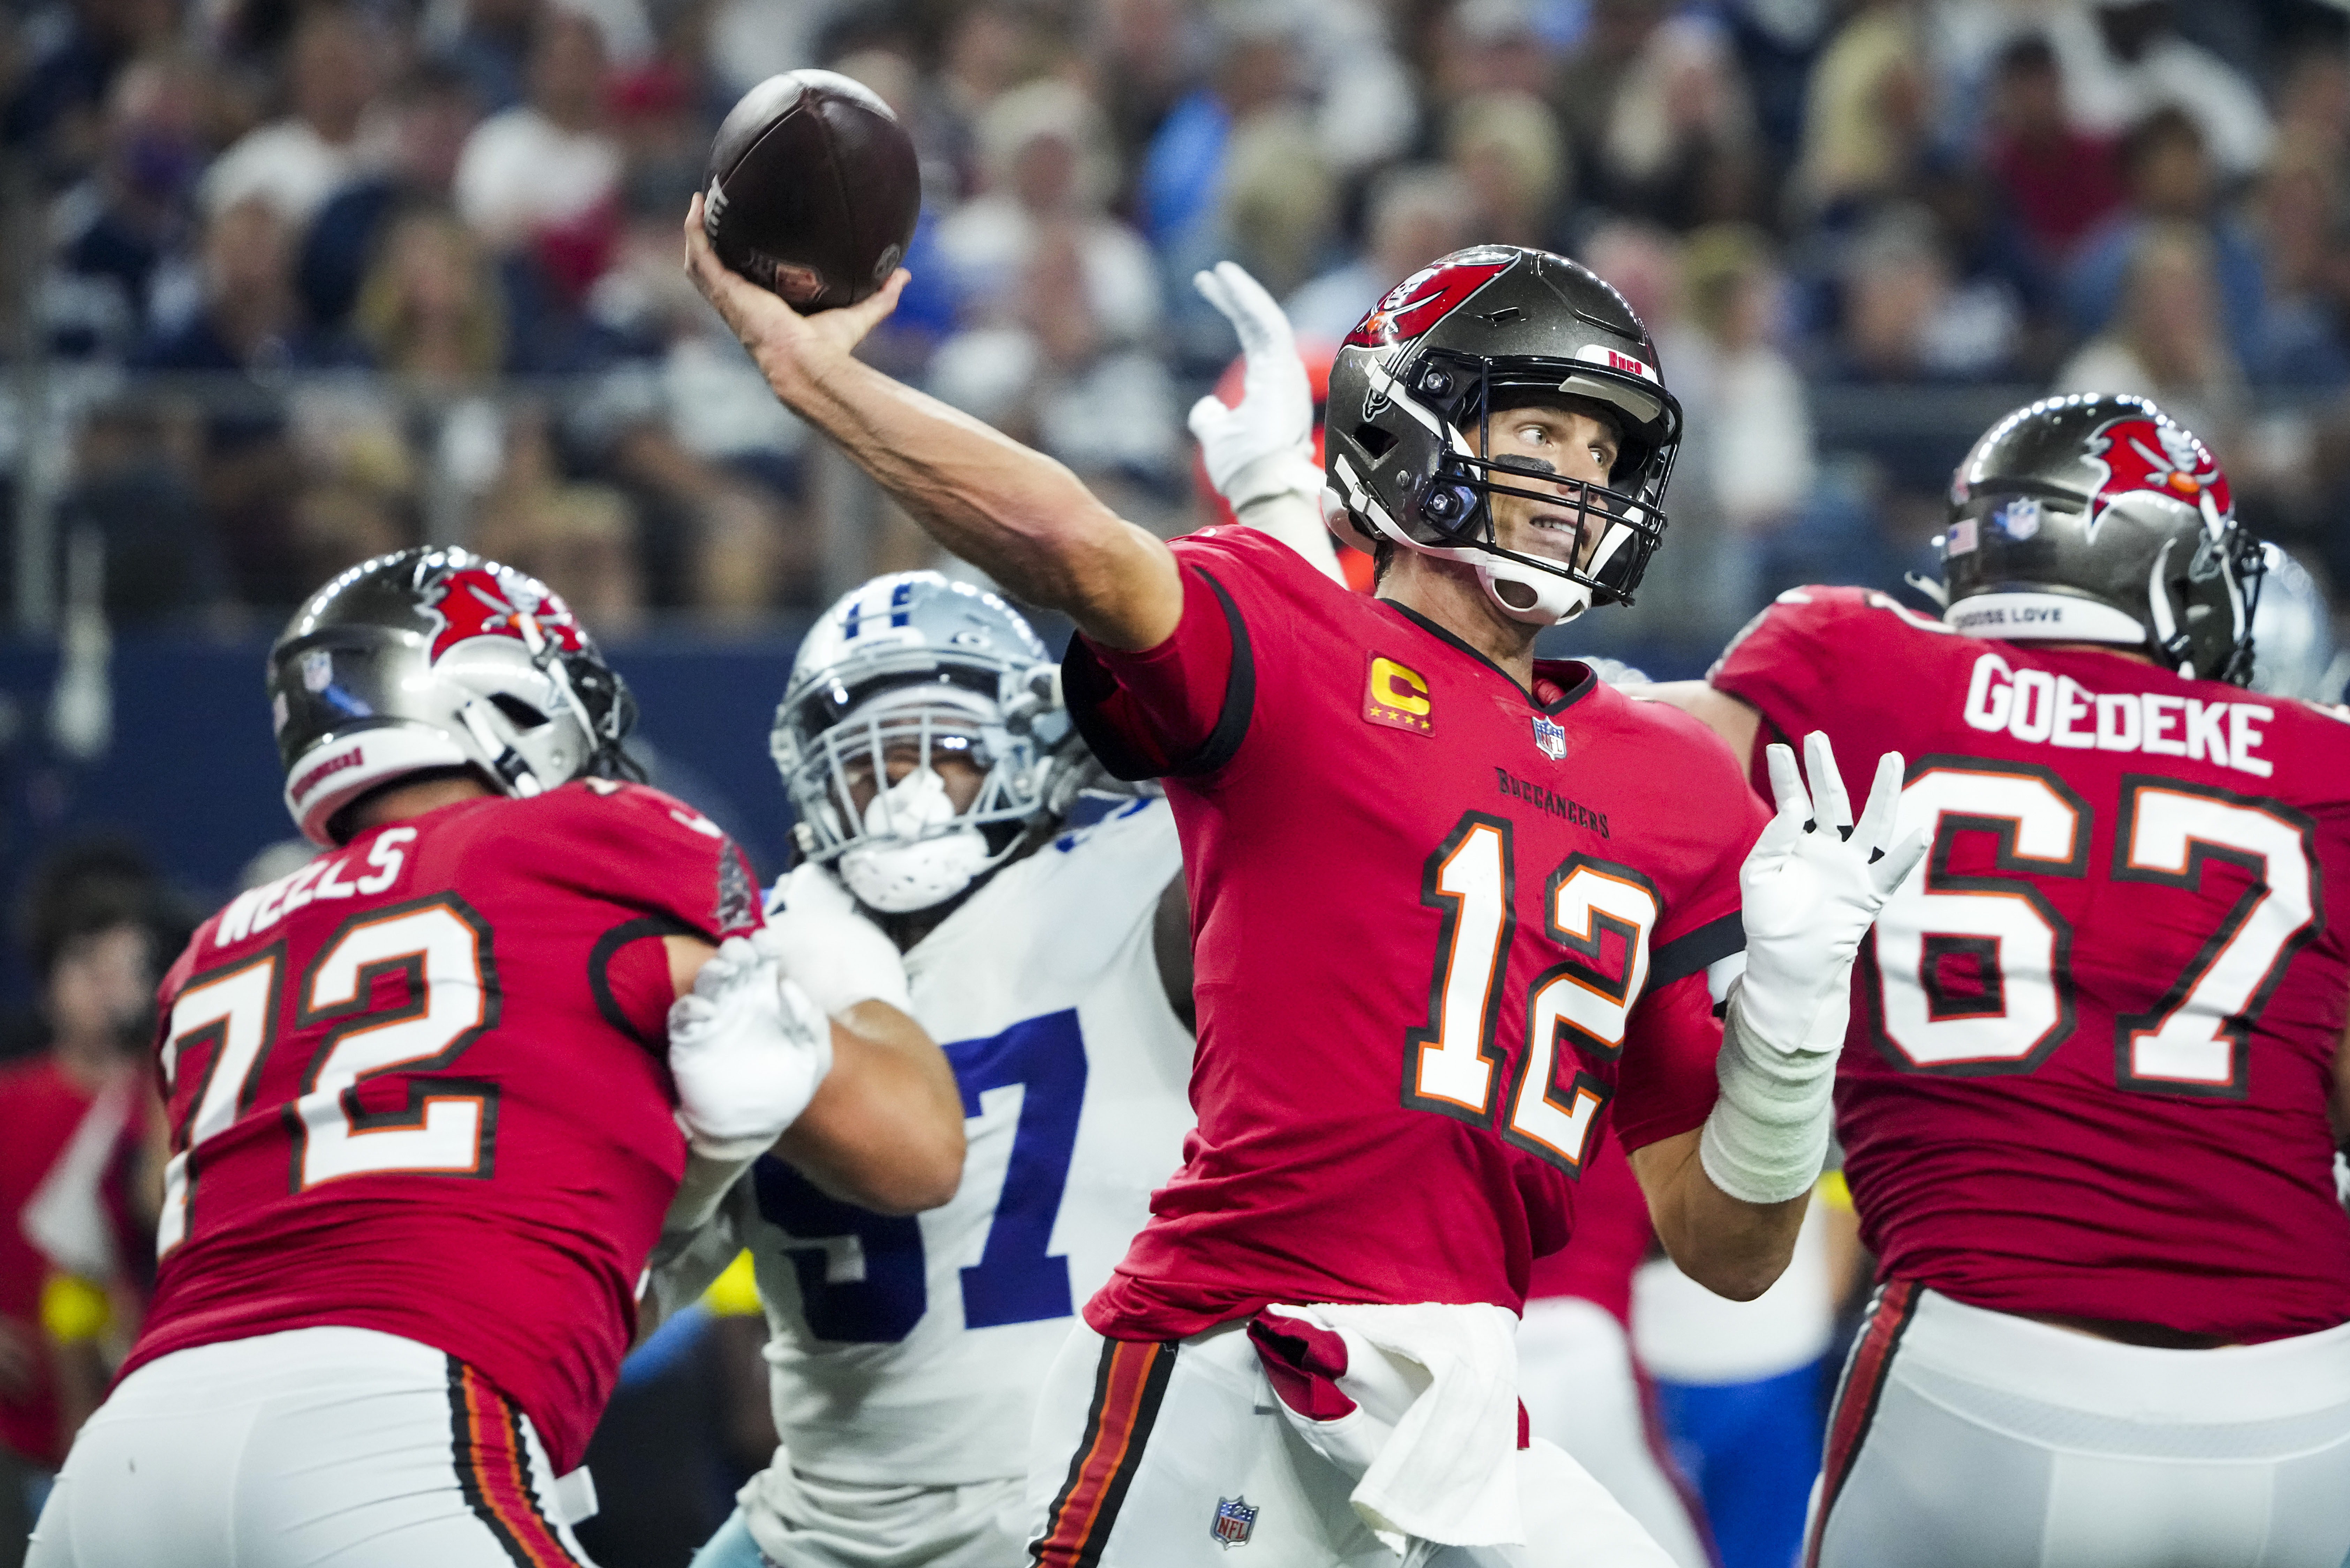 5 things to know about the Buccaneers ahead of Cowboys wild-card matchup